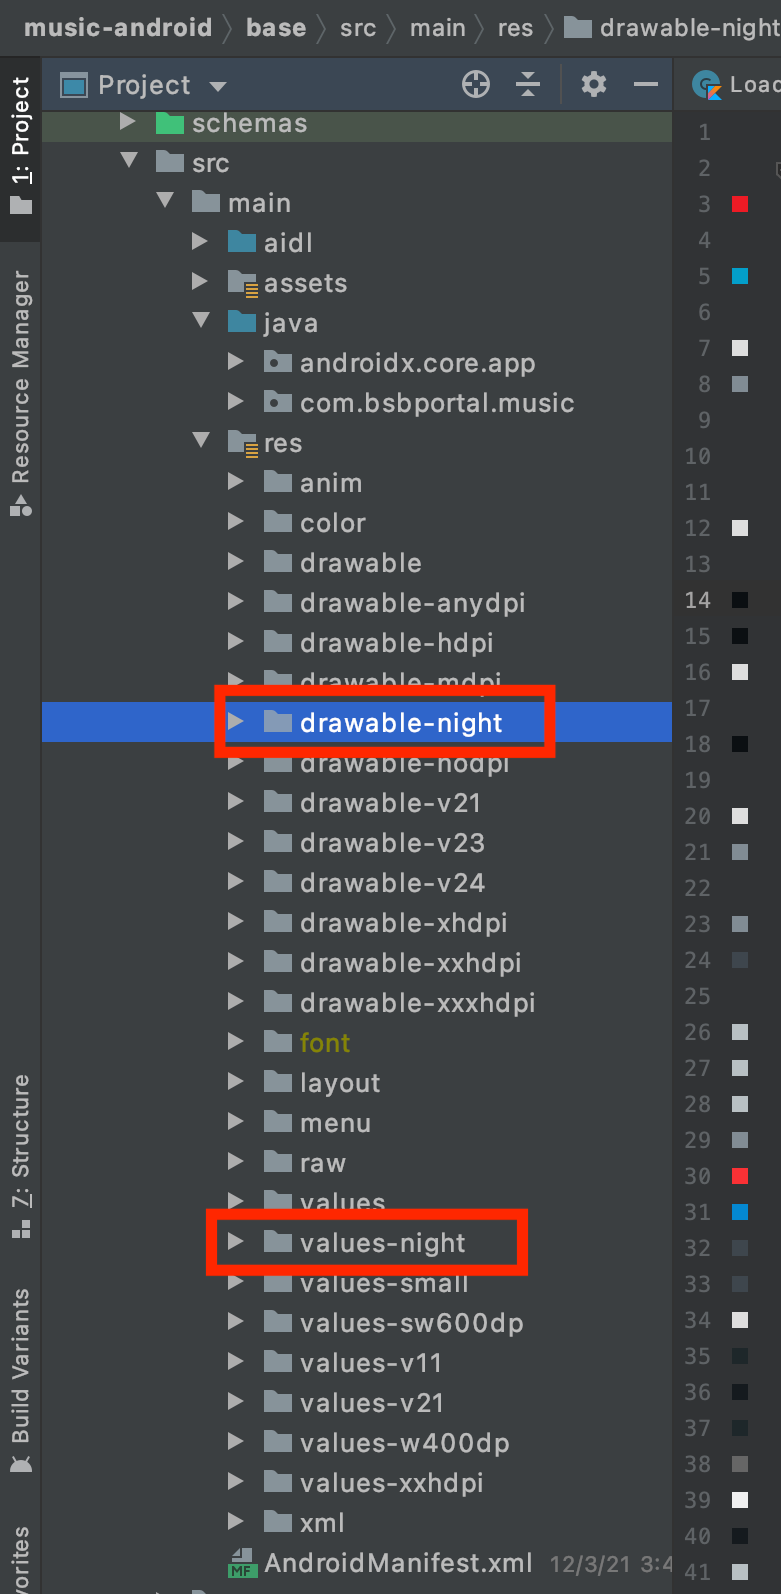 Folder structure for night resources